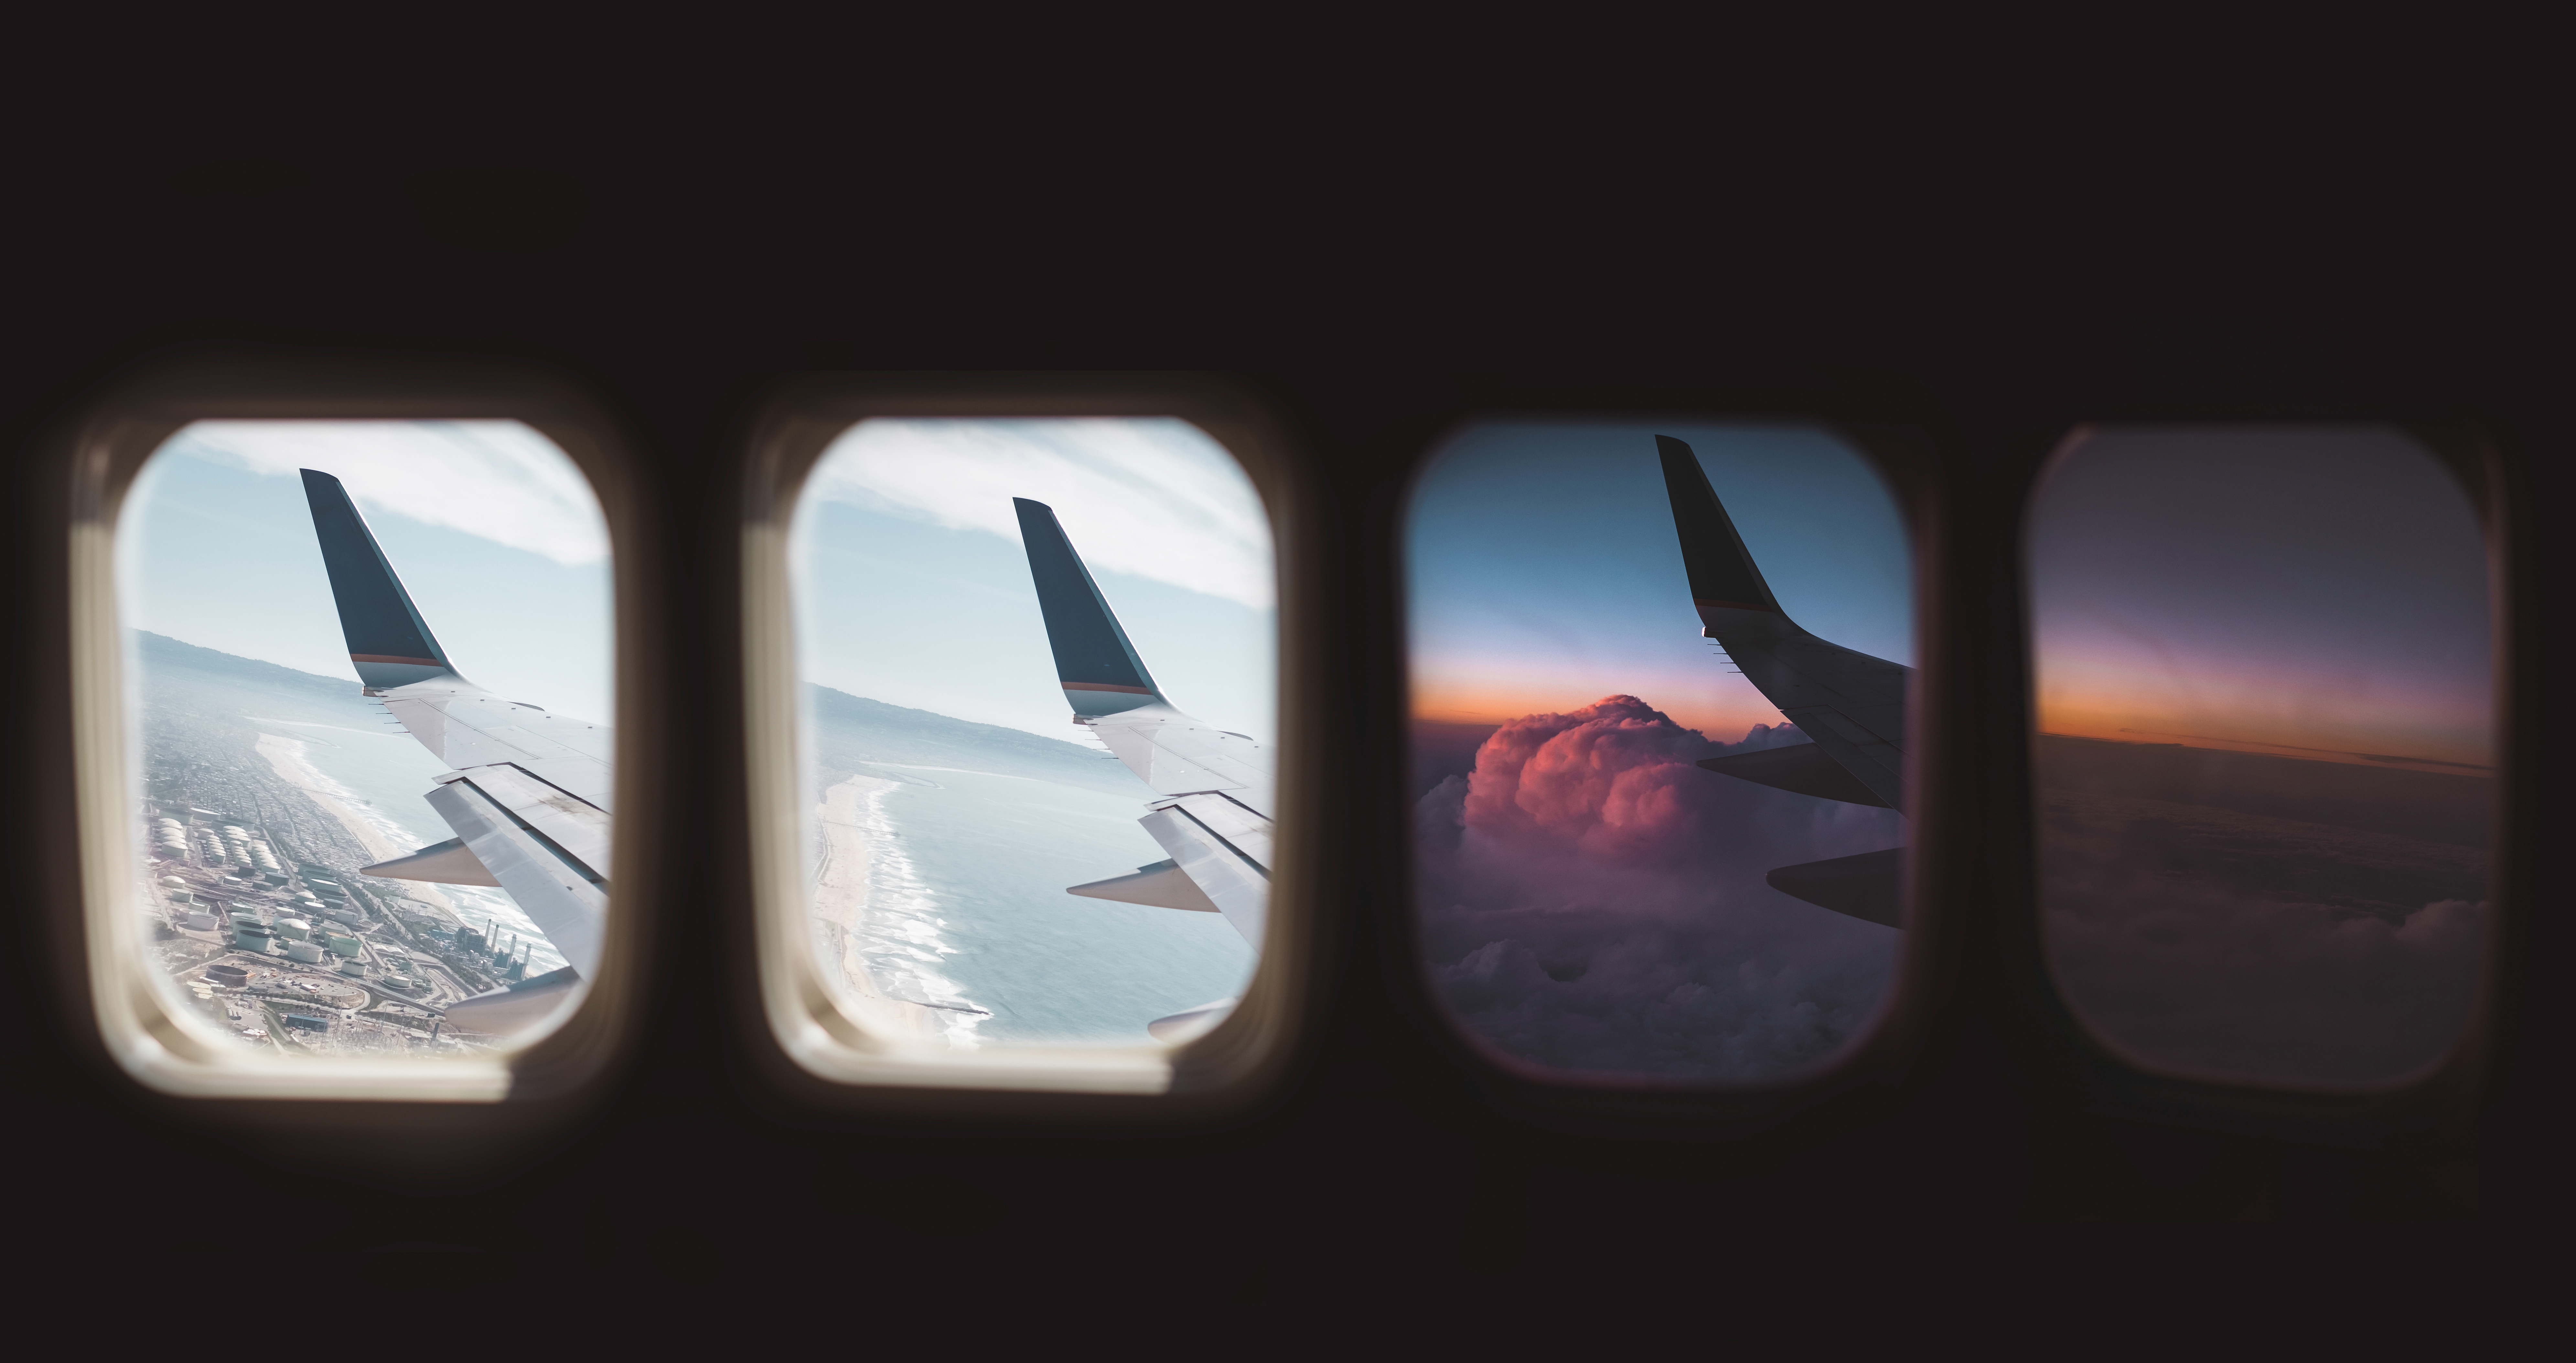 Collage of 4 images looking out an airplane window at the airplane wing and sky below